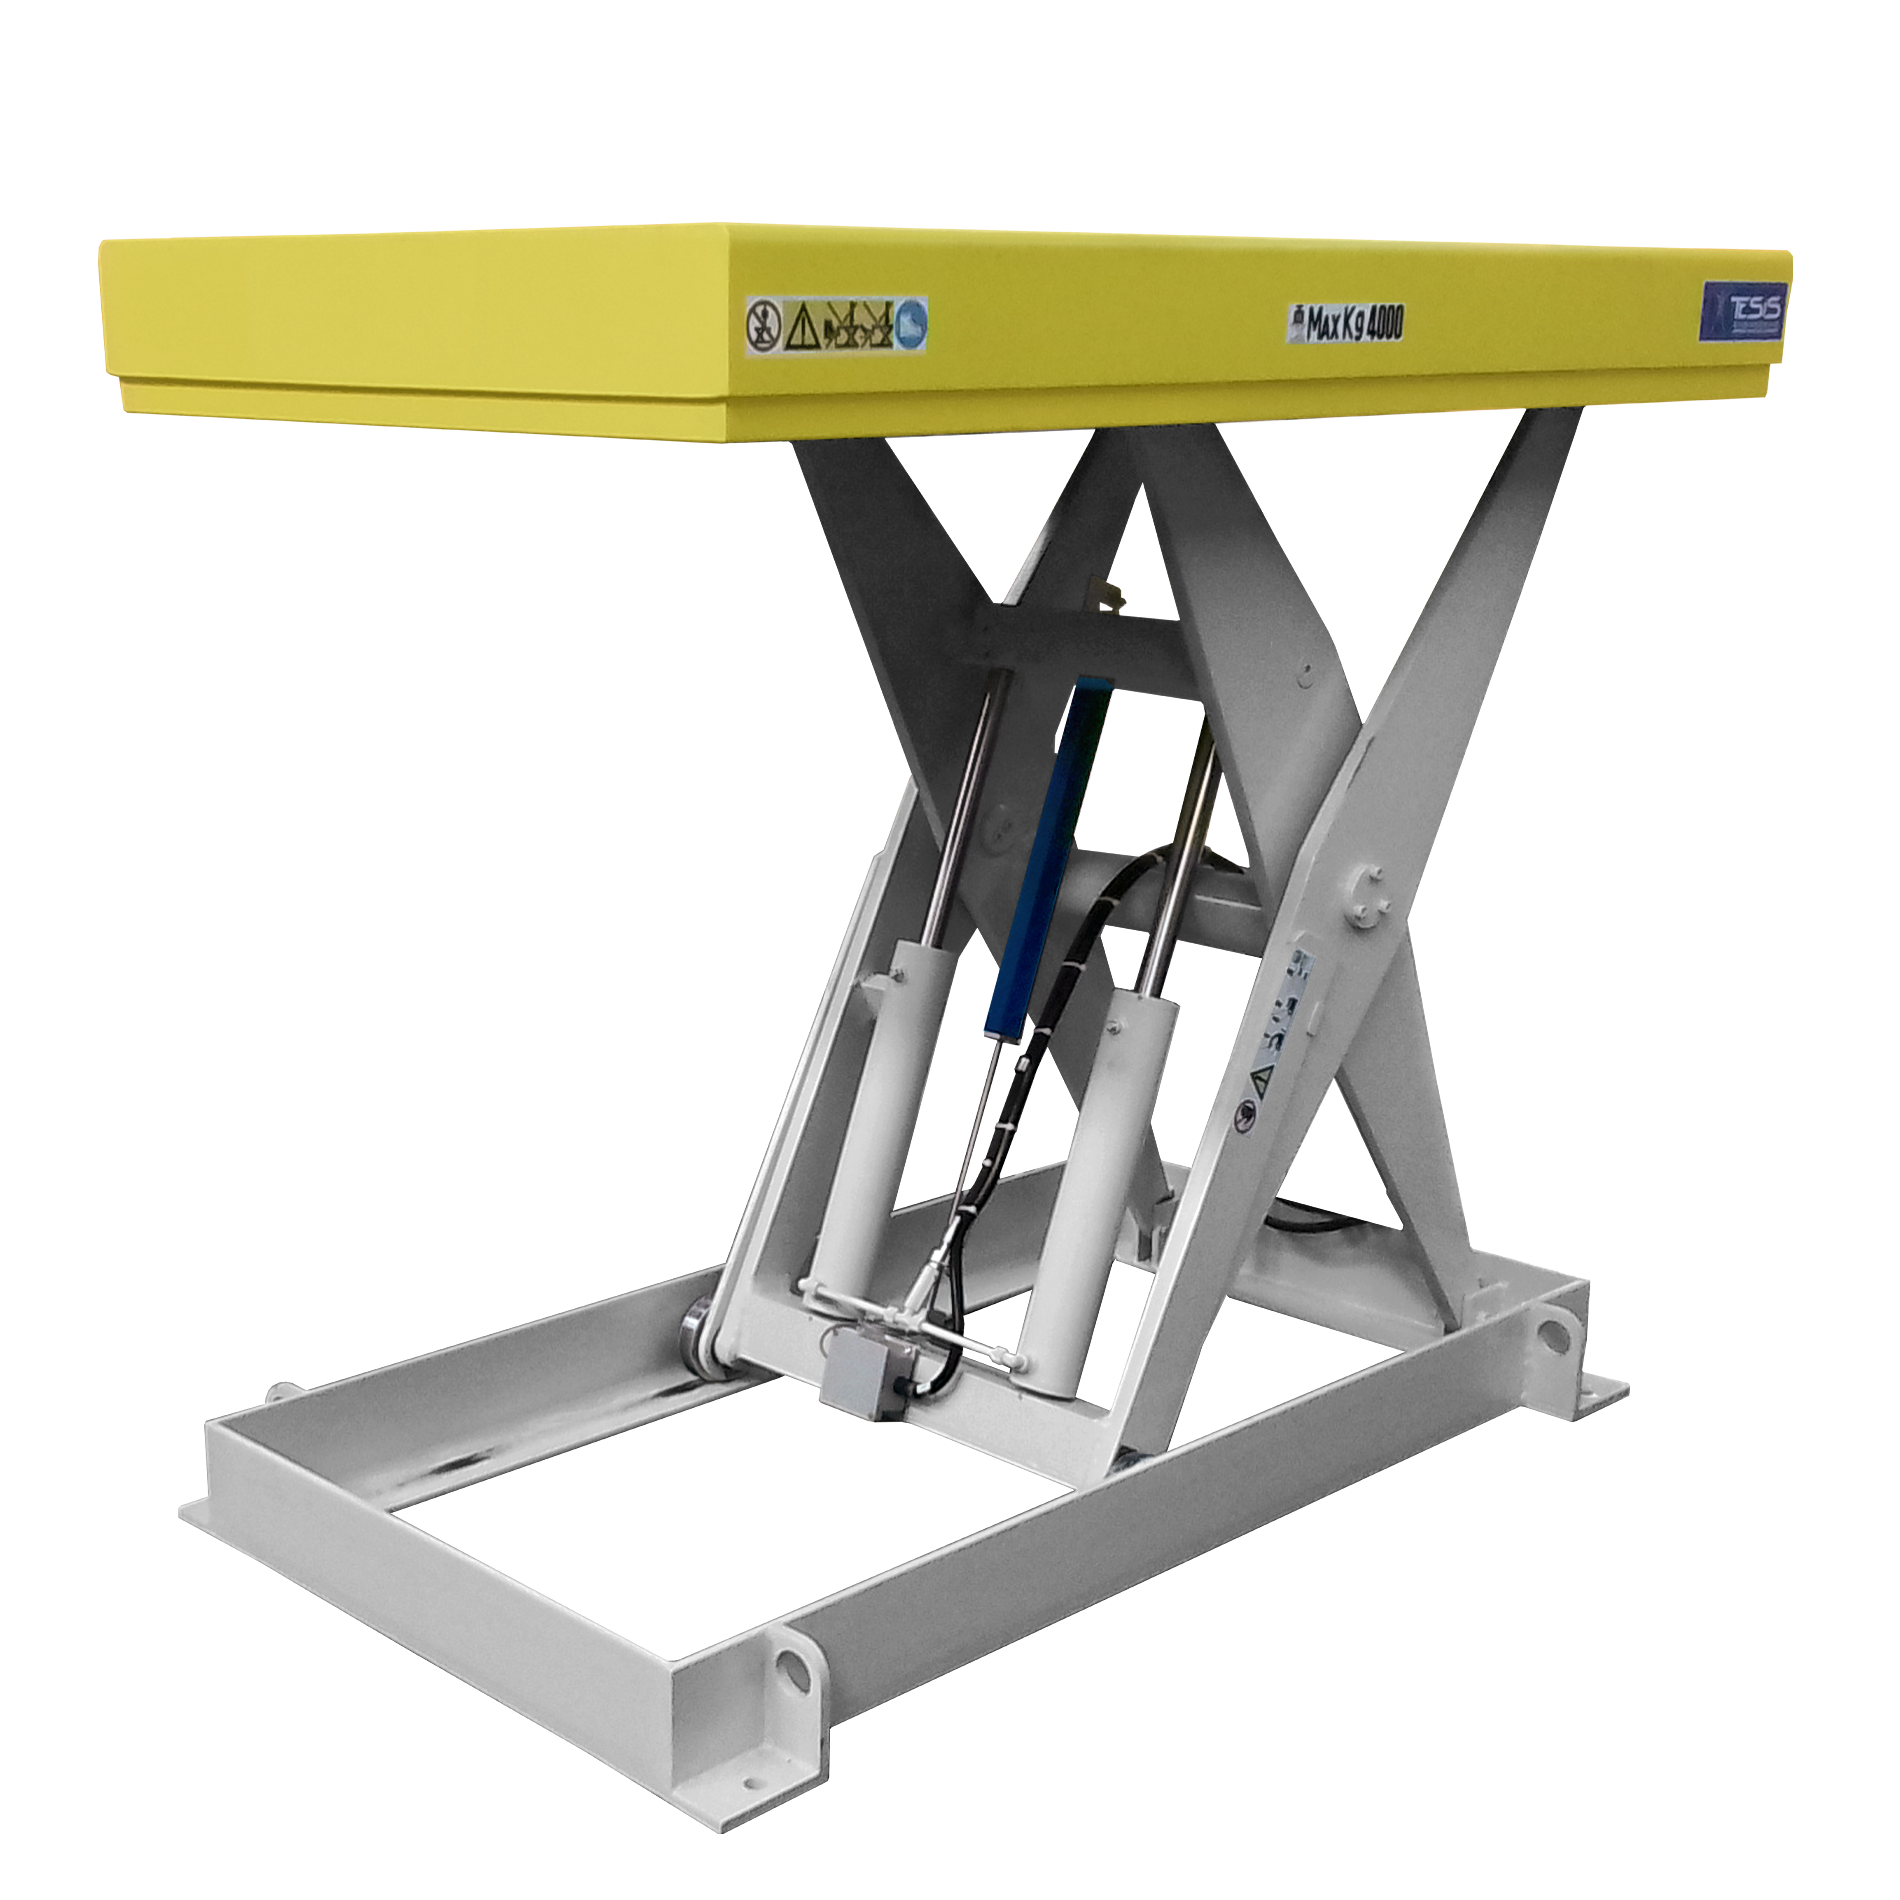 Scissor lift table with interface encoder for detecting platform position - lifting tables for automation - industrial platform lifts